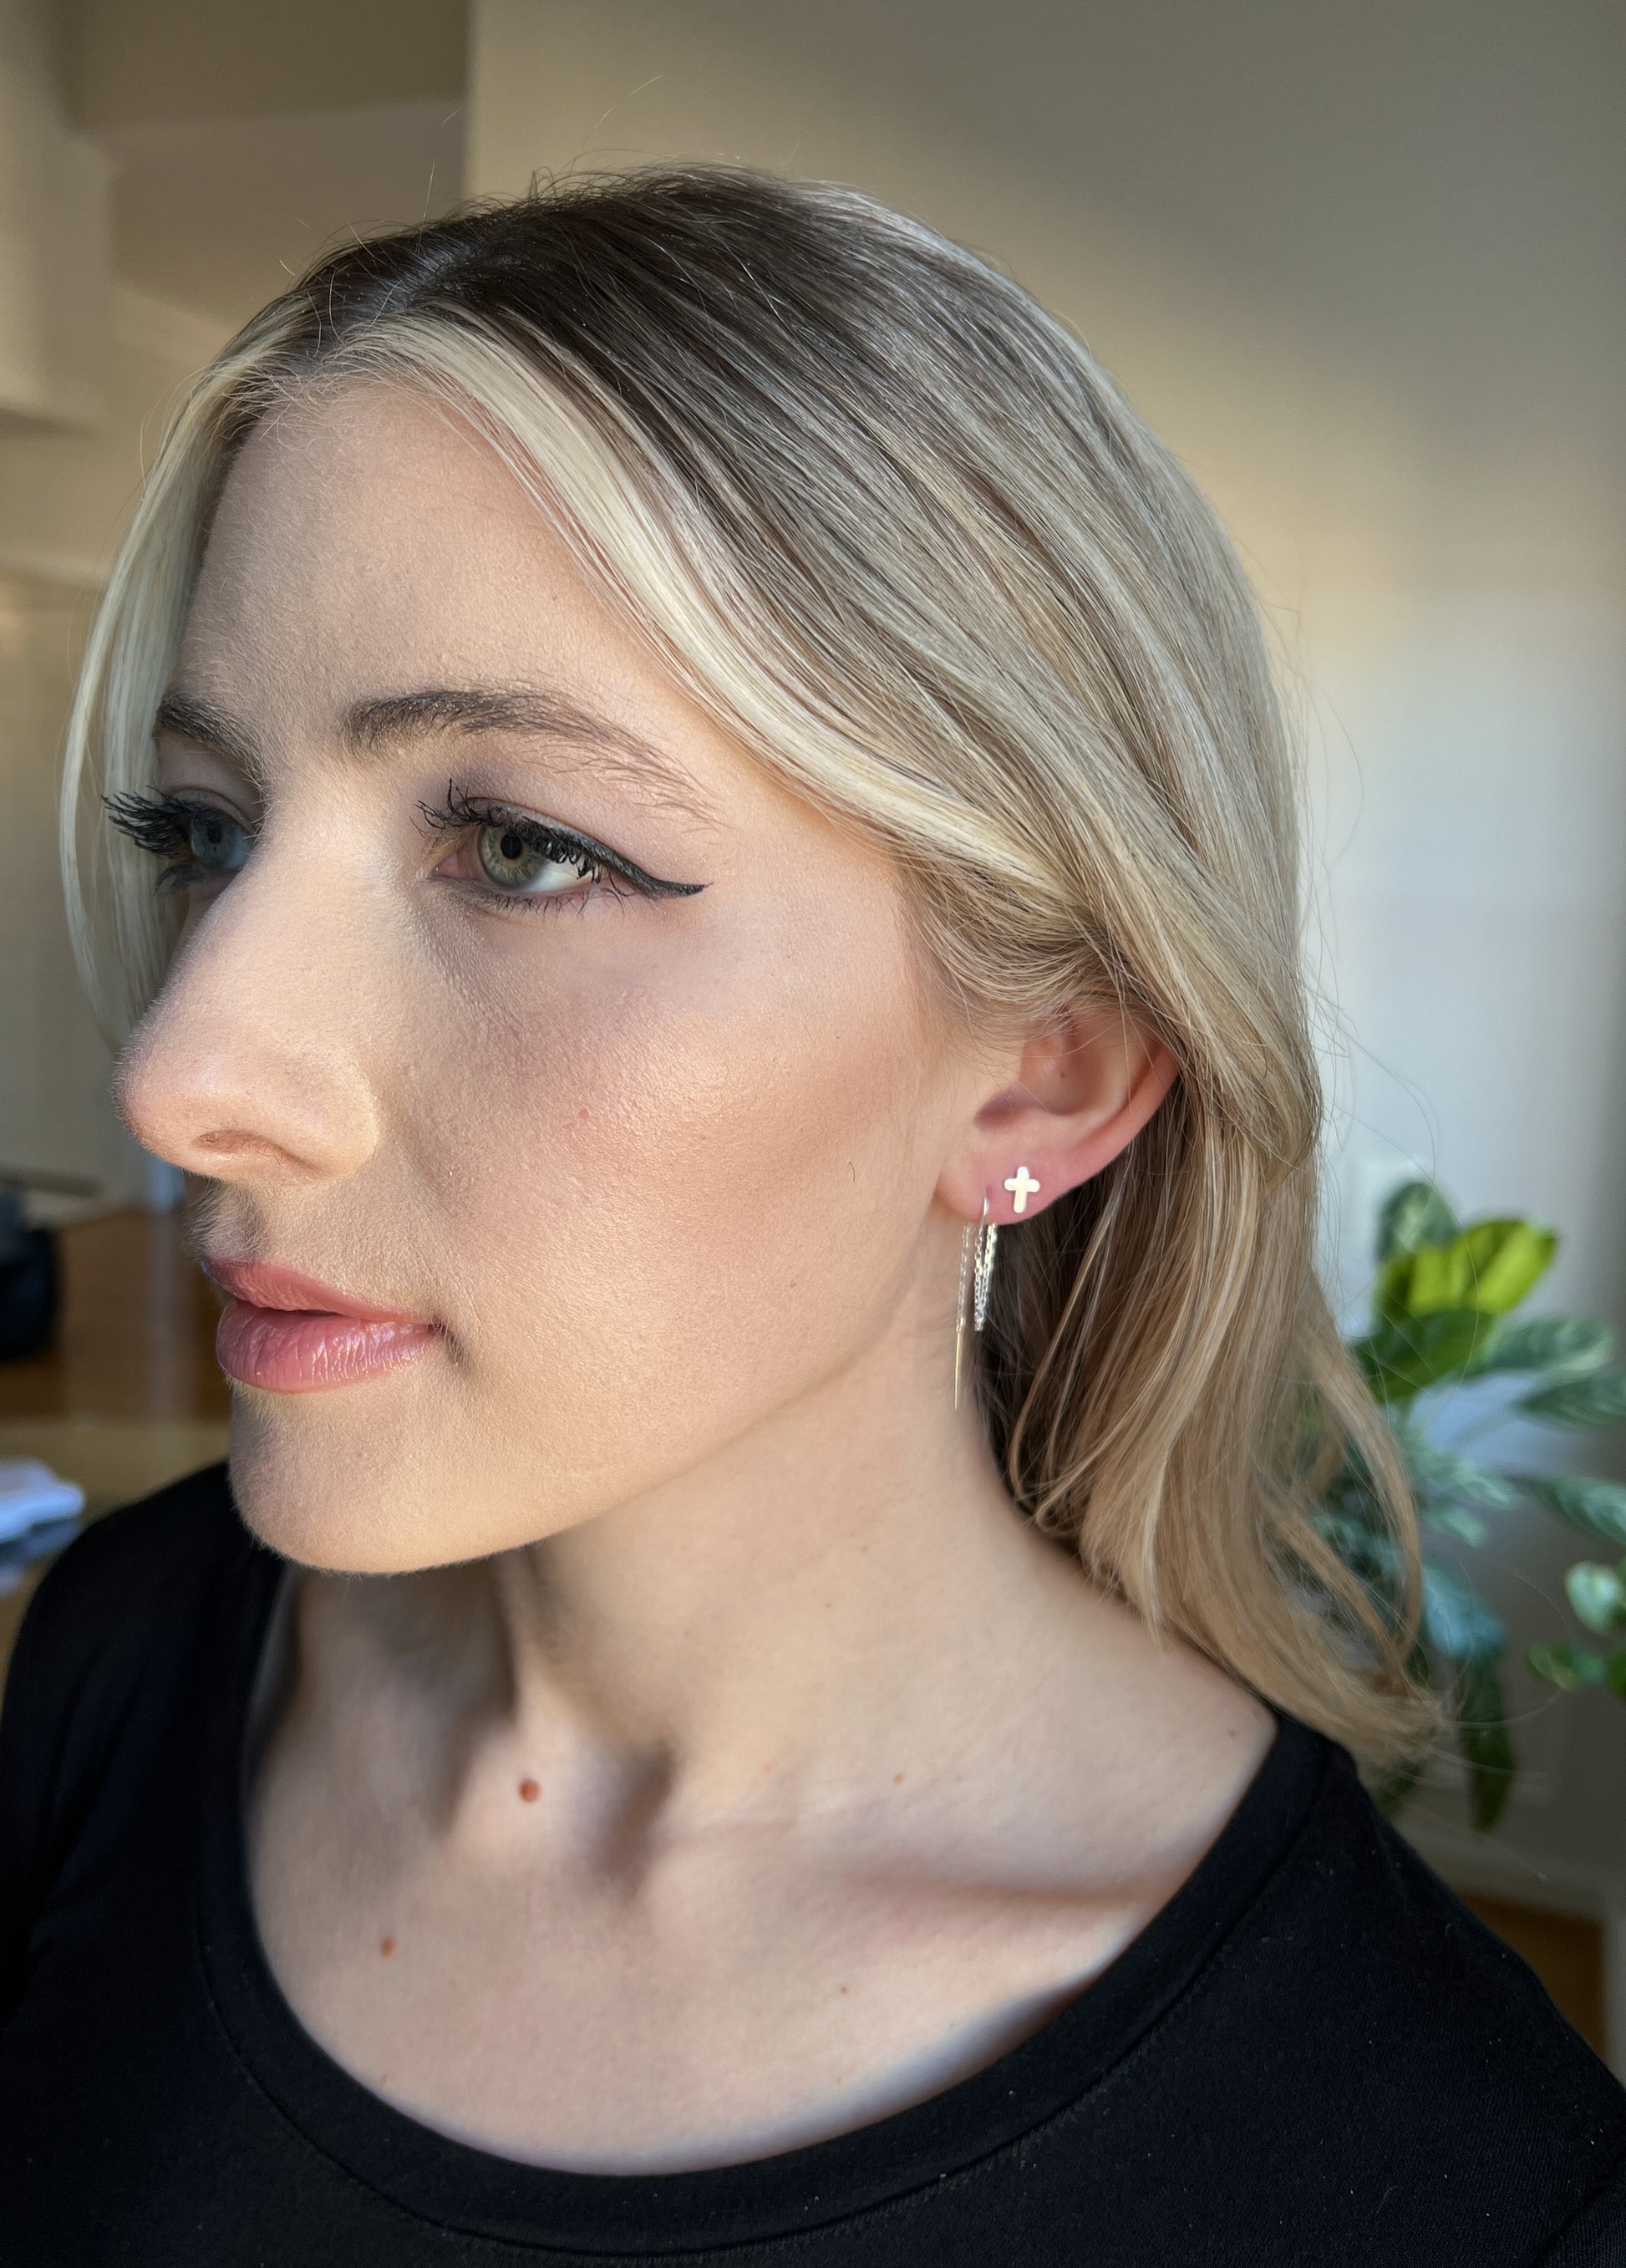 two hole earrings or connected earrings for two piercings